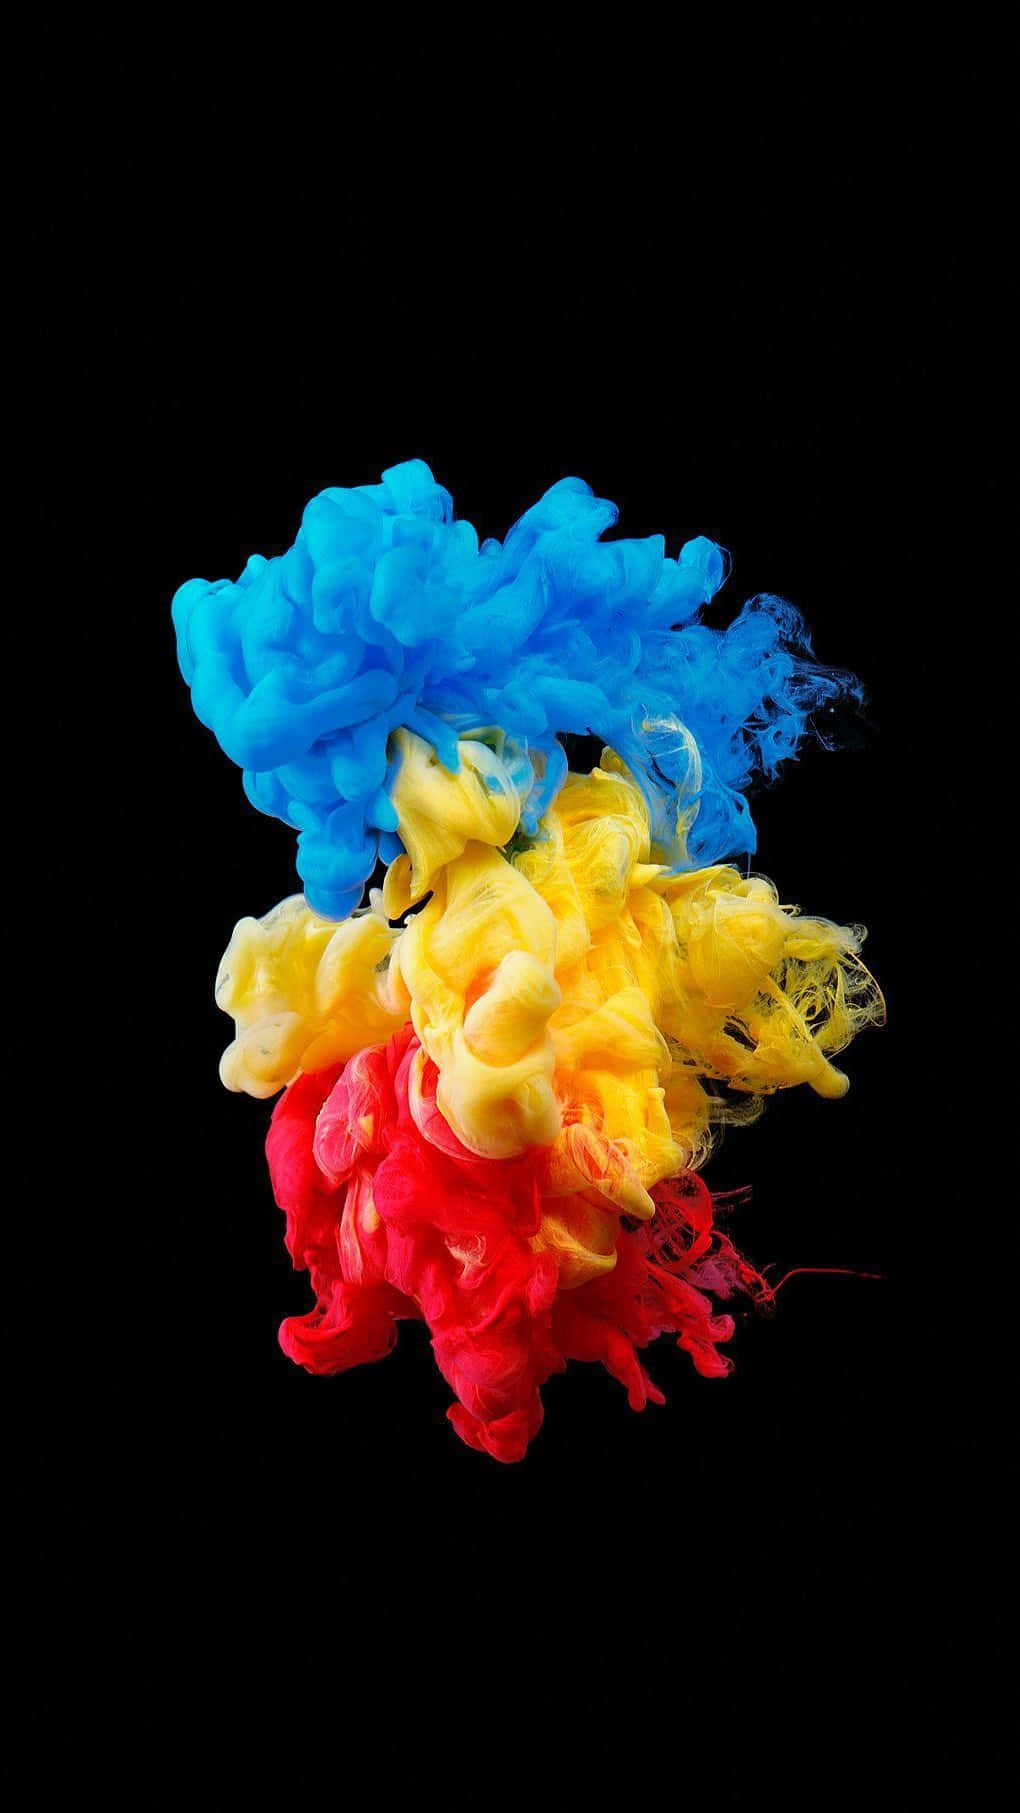 A Colorful Liquid Is Poured Over A Black Background